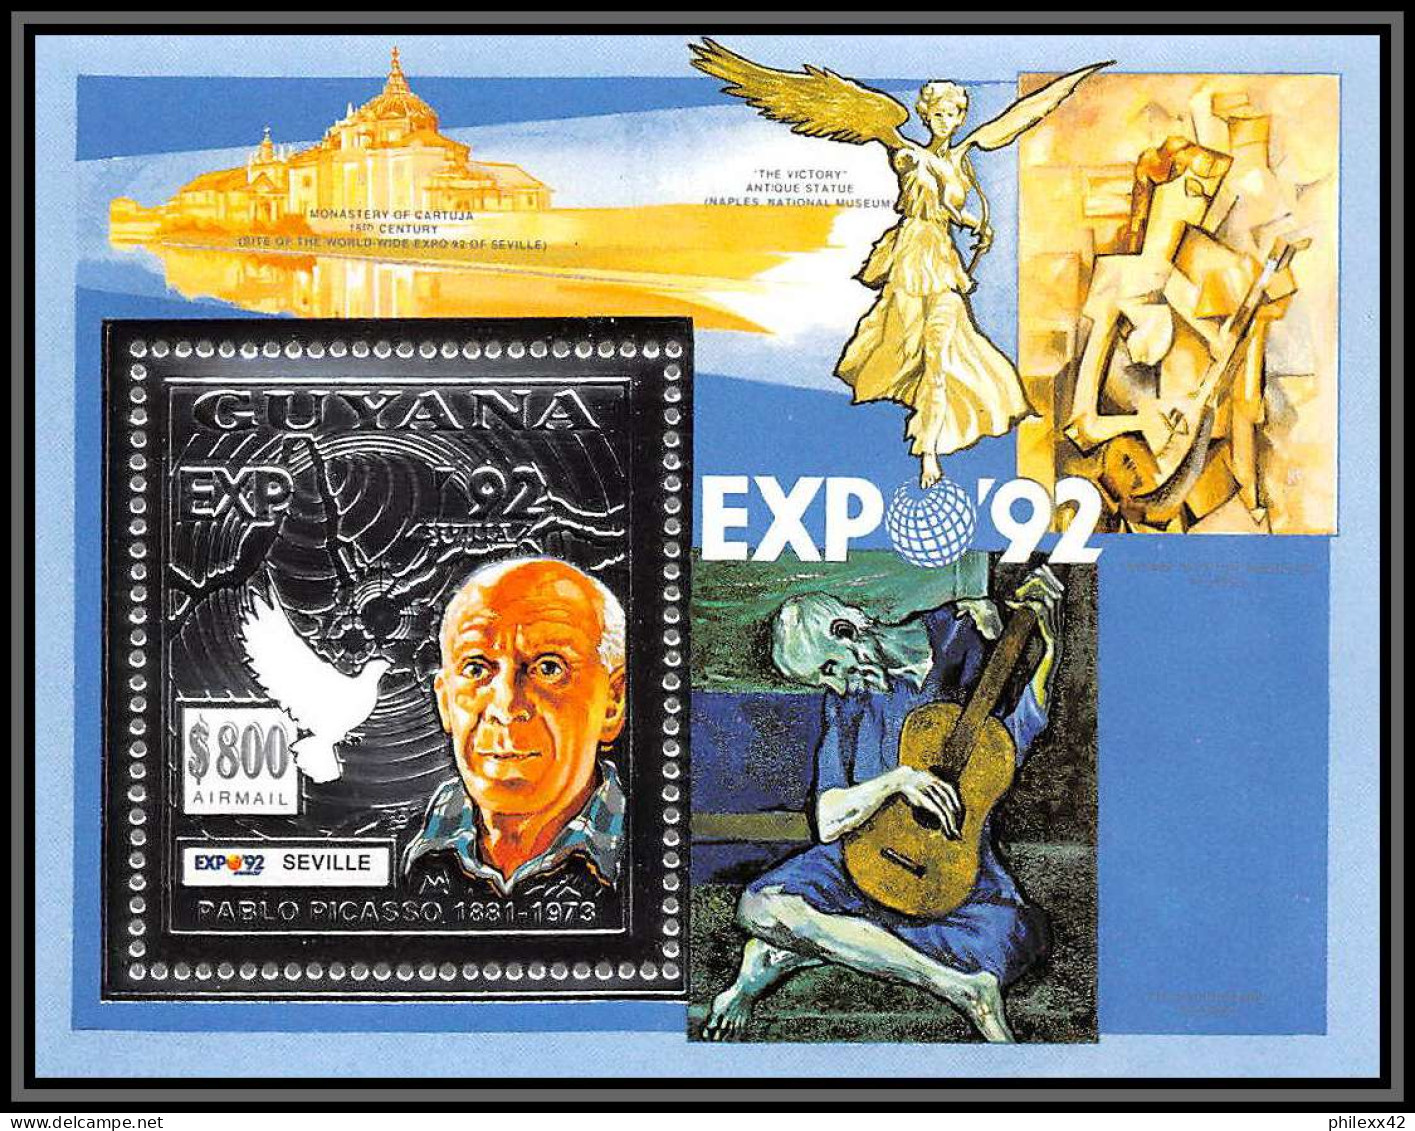 86149/ Guyana Mi N°233 A Pablo PICASSO Expo Seville 92 ARGENT SILVER Tableau (Painting) DOVE COLOMBE ** MNH - Picasso